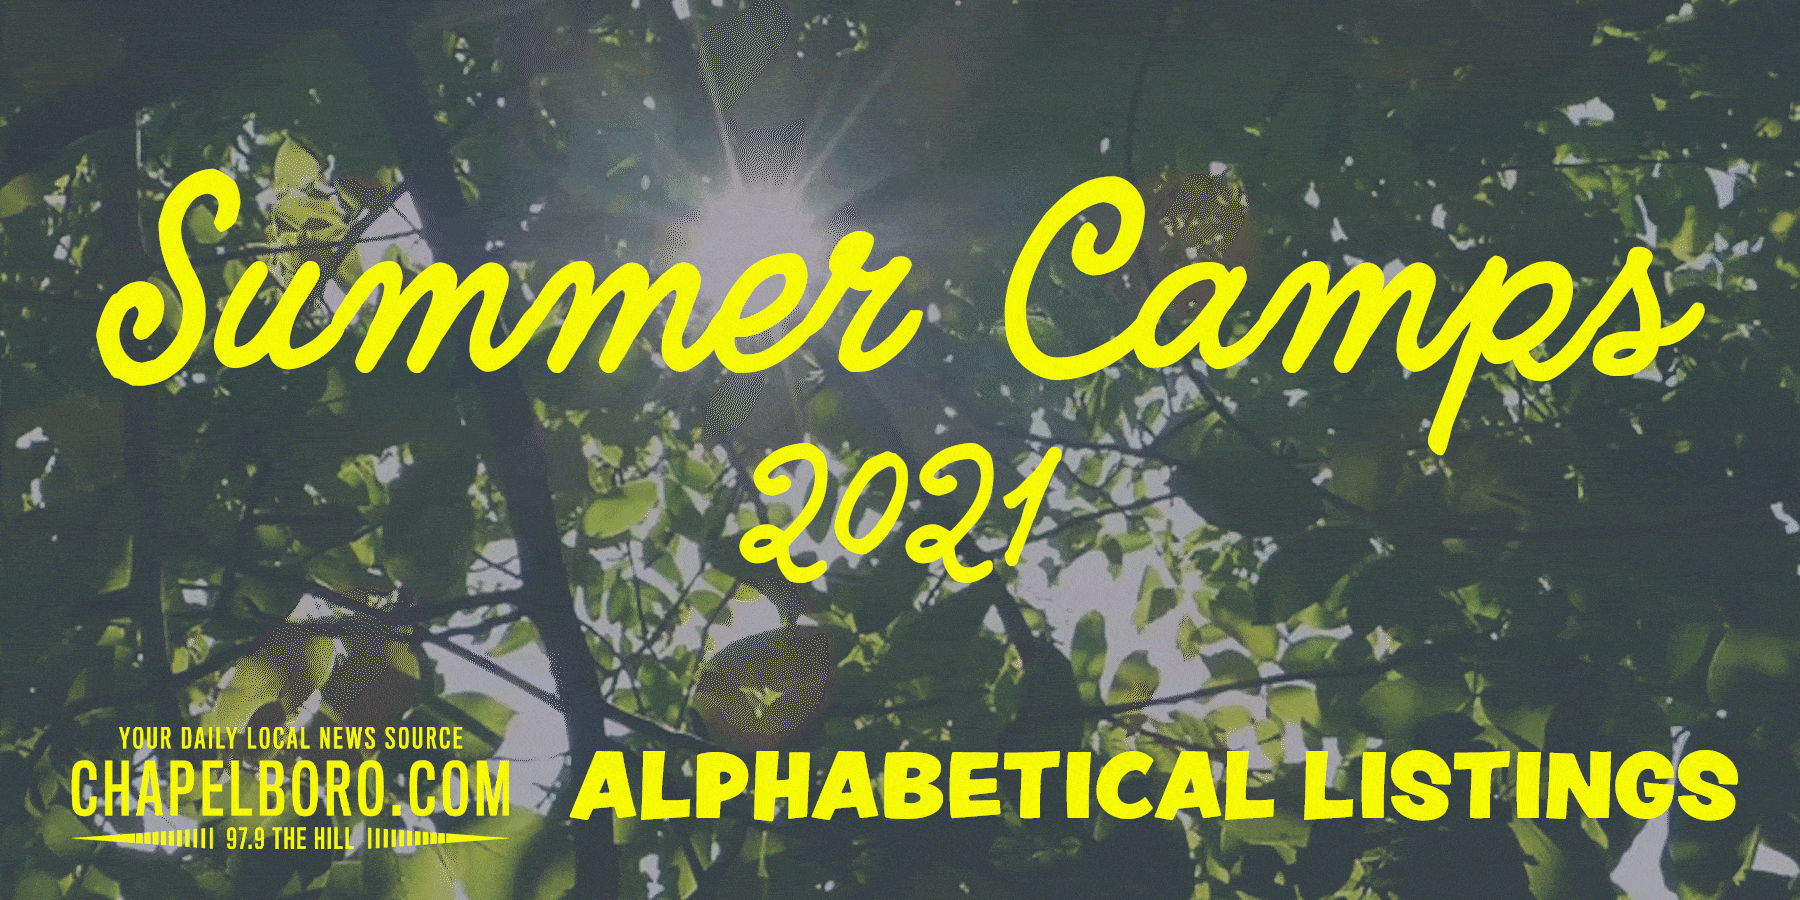 Chapel Hill Area Summer Camps Guide Chapelboro Com - summer camp mod minecraft create with roblox engineer robots